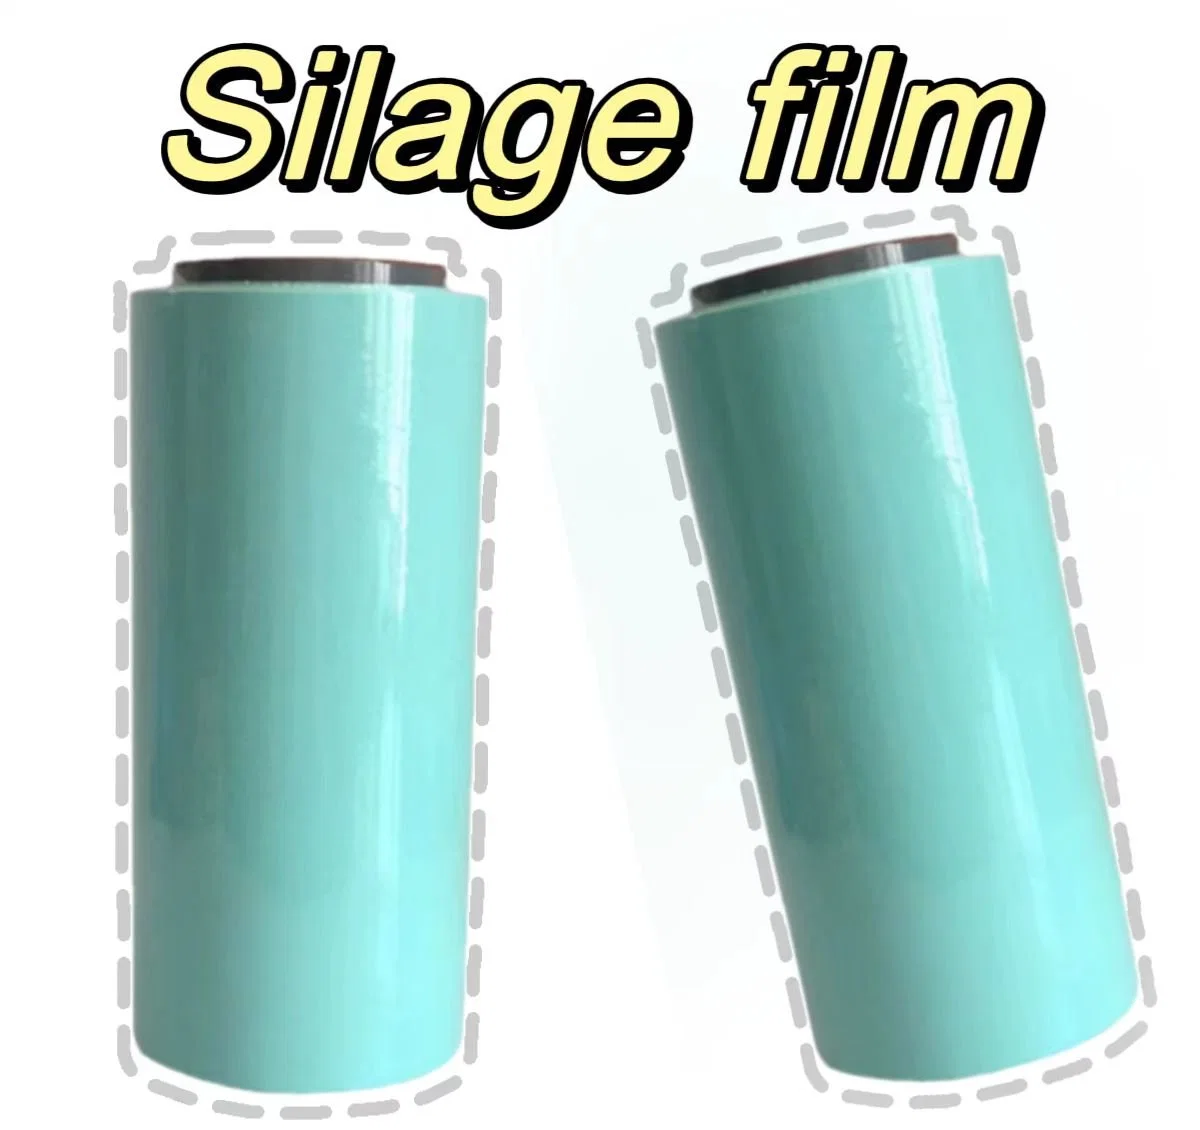 Lyr-Silage Stretch Plastic LLDPE for Packing Silage (haylage/grass/crop)